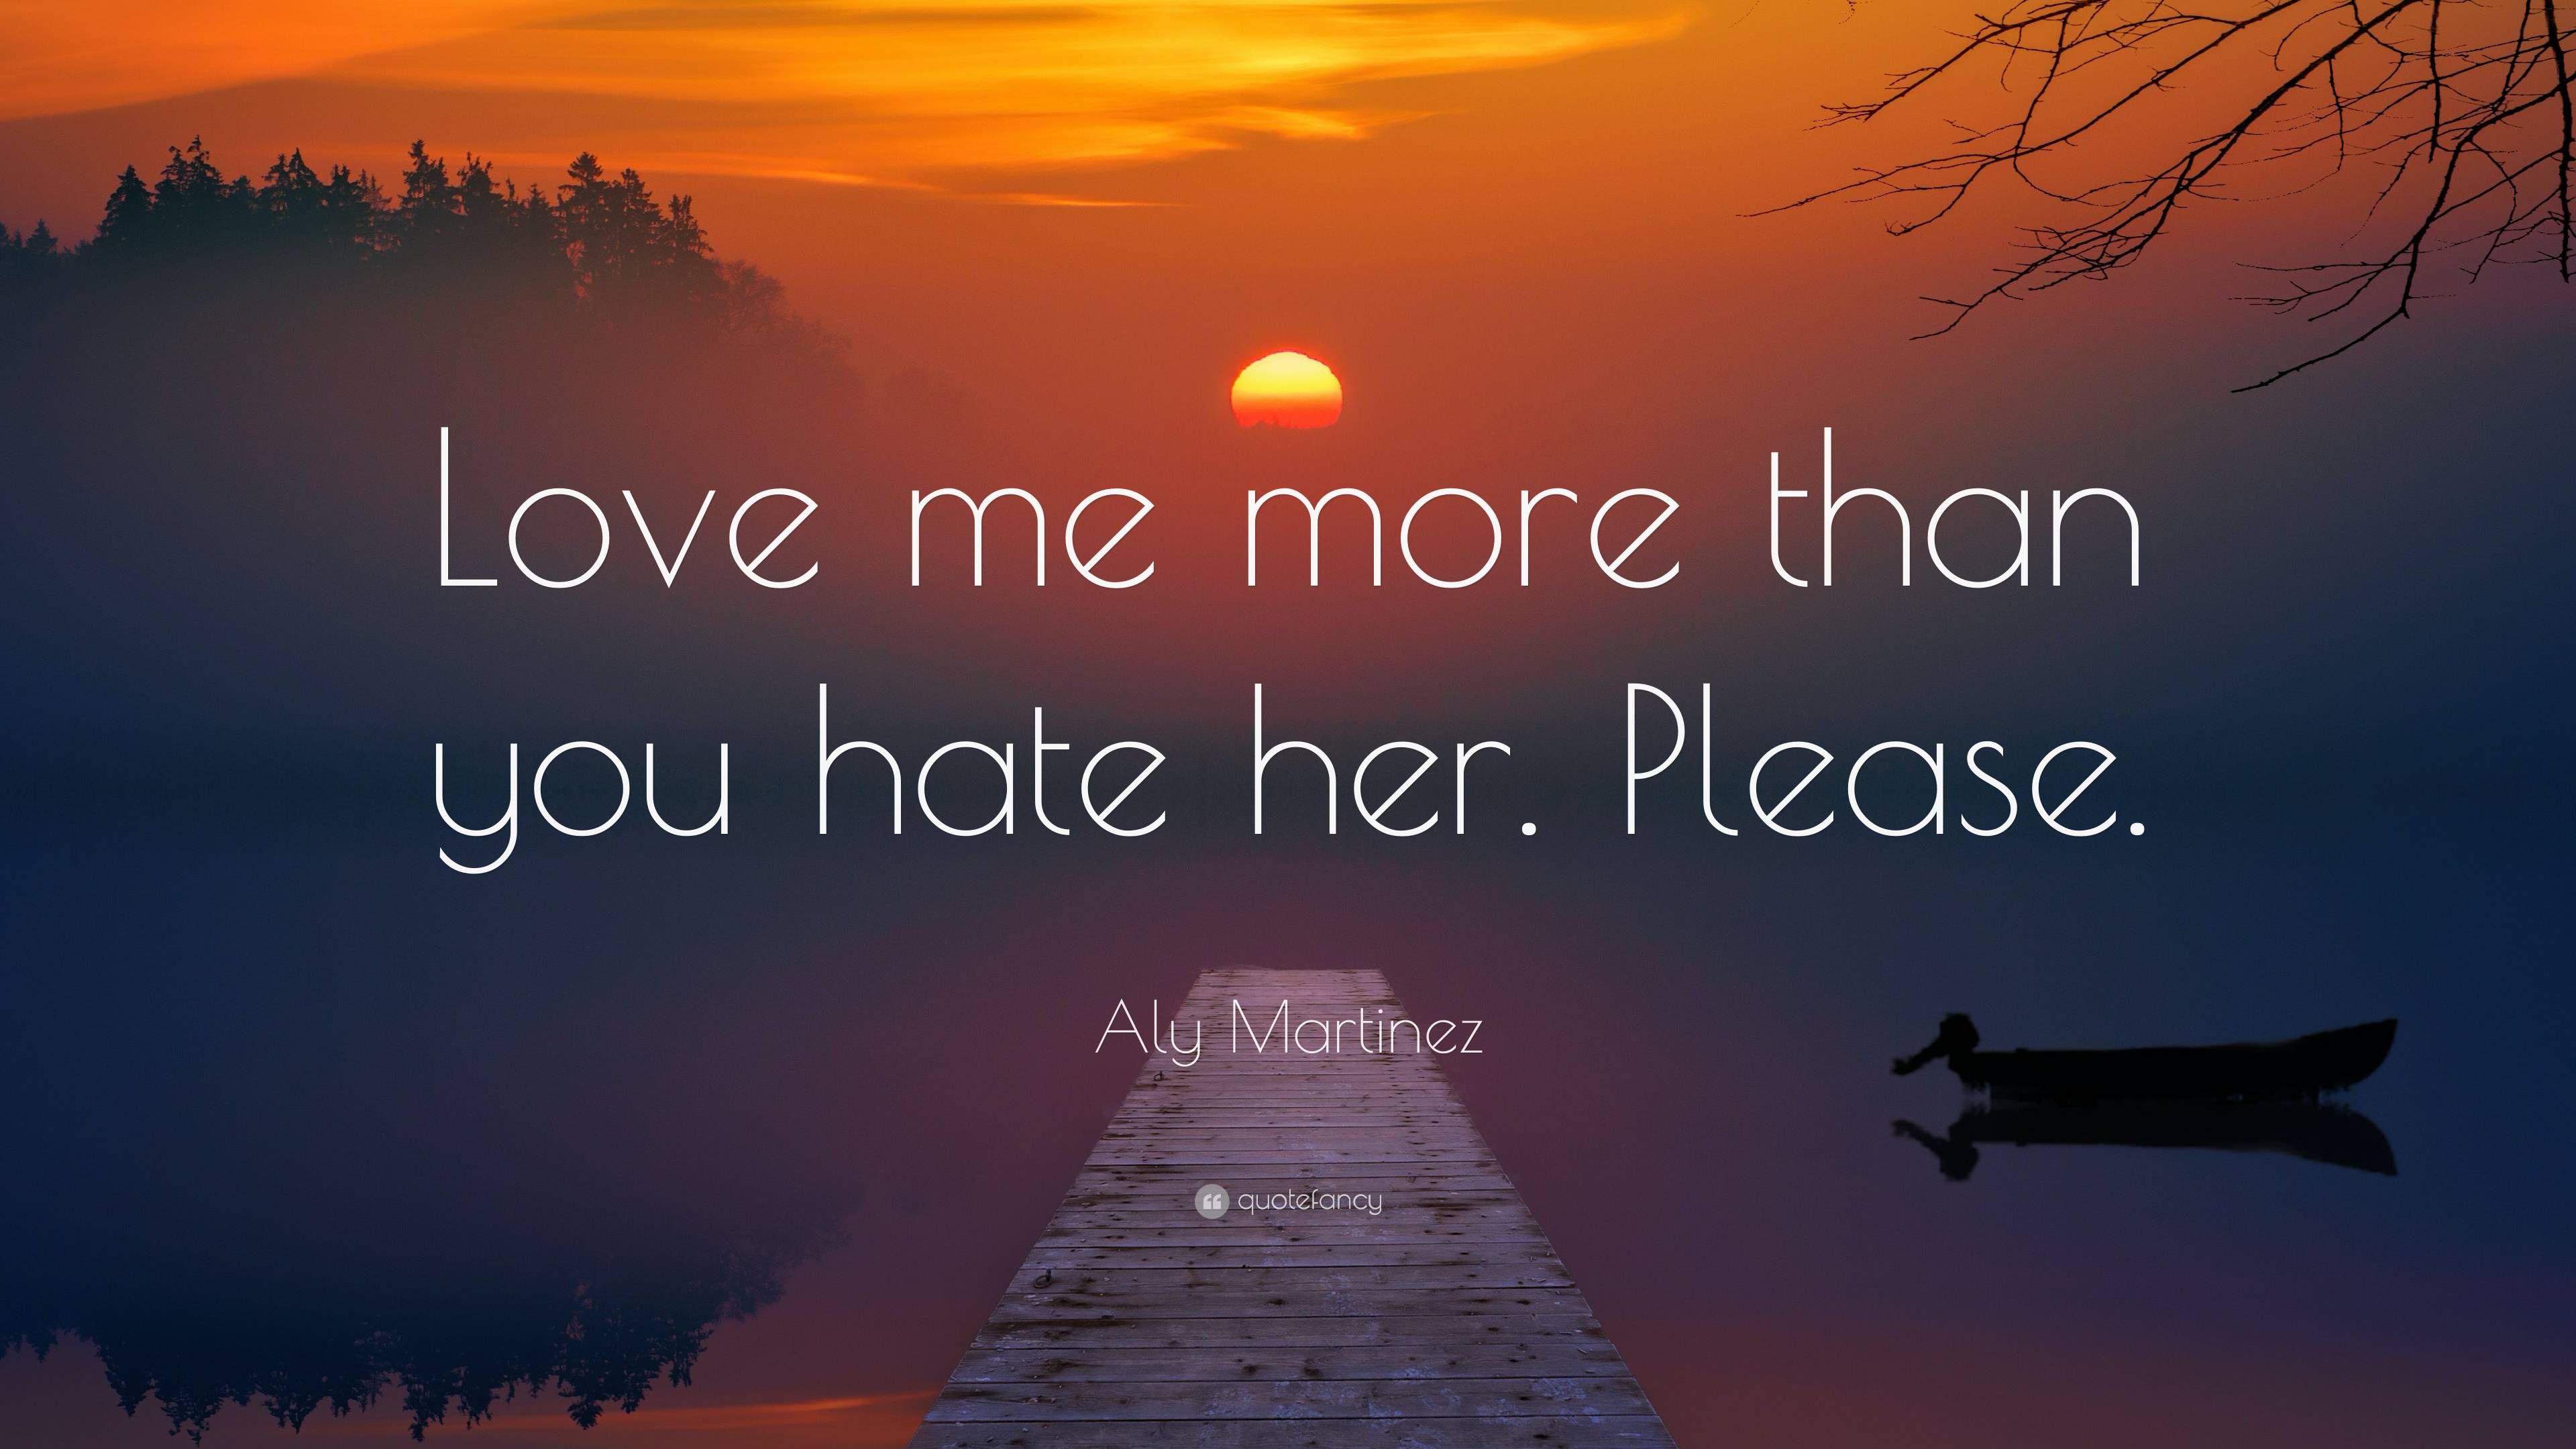 Aly Martinez Quote: “Love me more than you hate her. Please.”